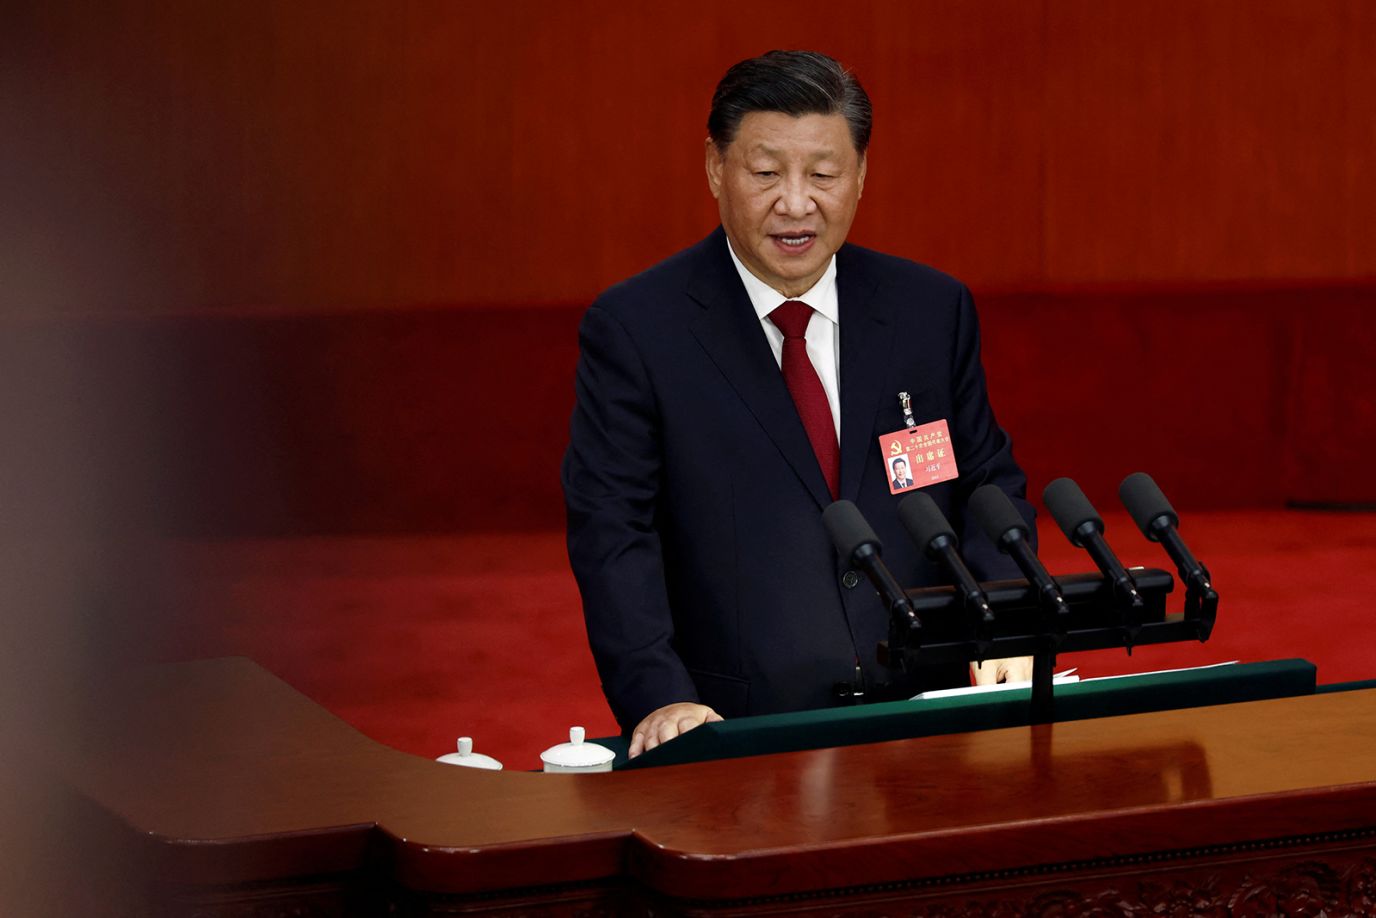 People at The Centre of Xi Jinping’s CPC’s National Congress Report